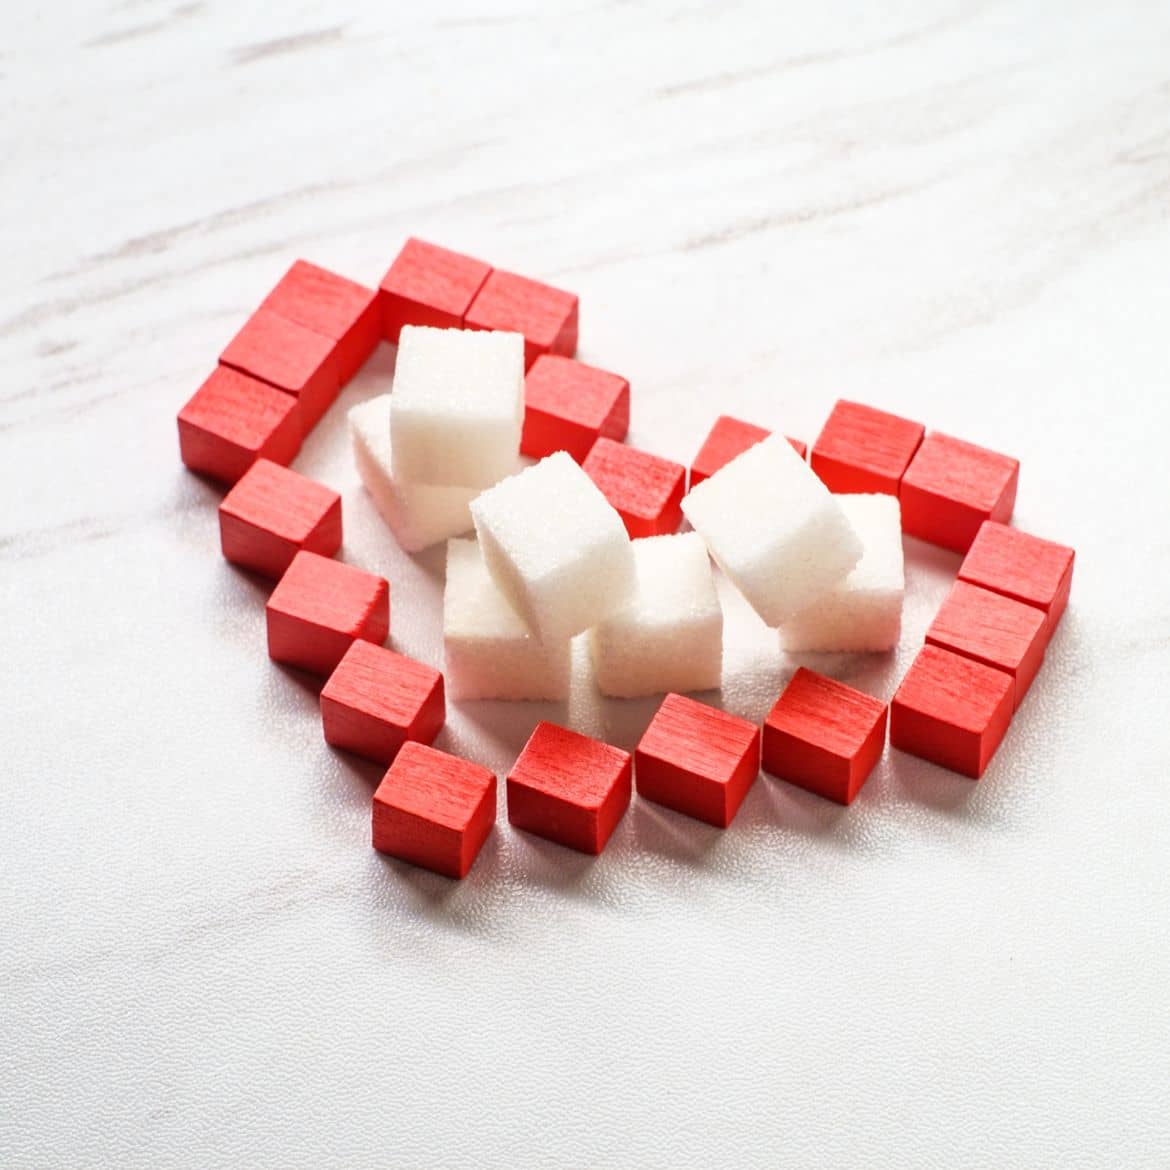 A sugar cubes in a shape of heart representing elements of glucose.